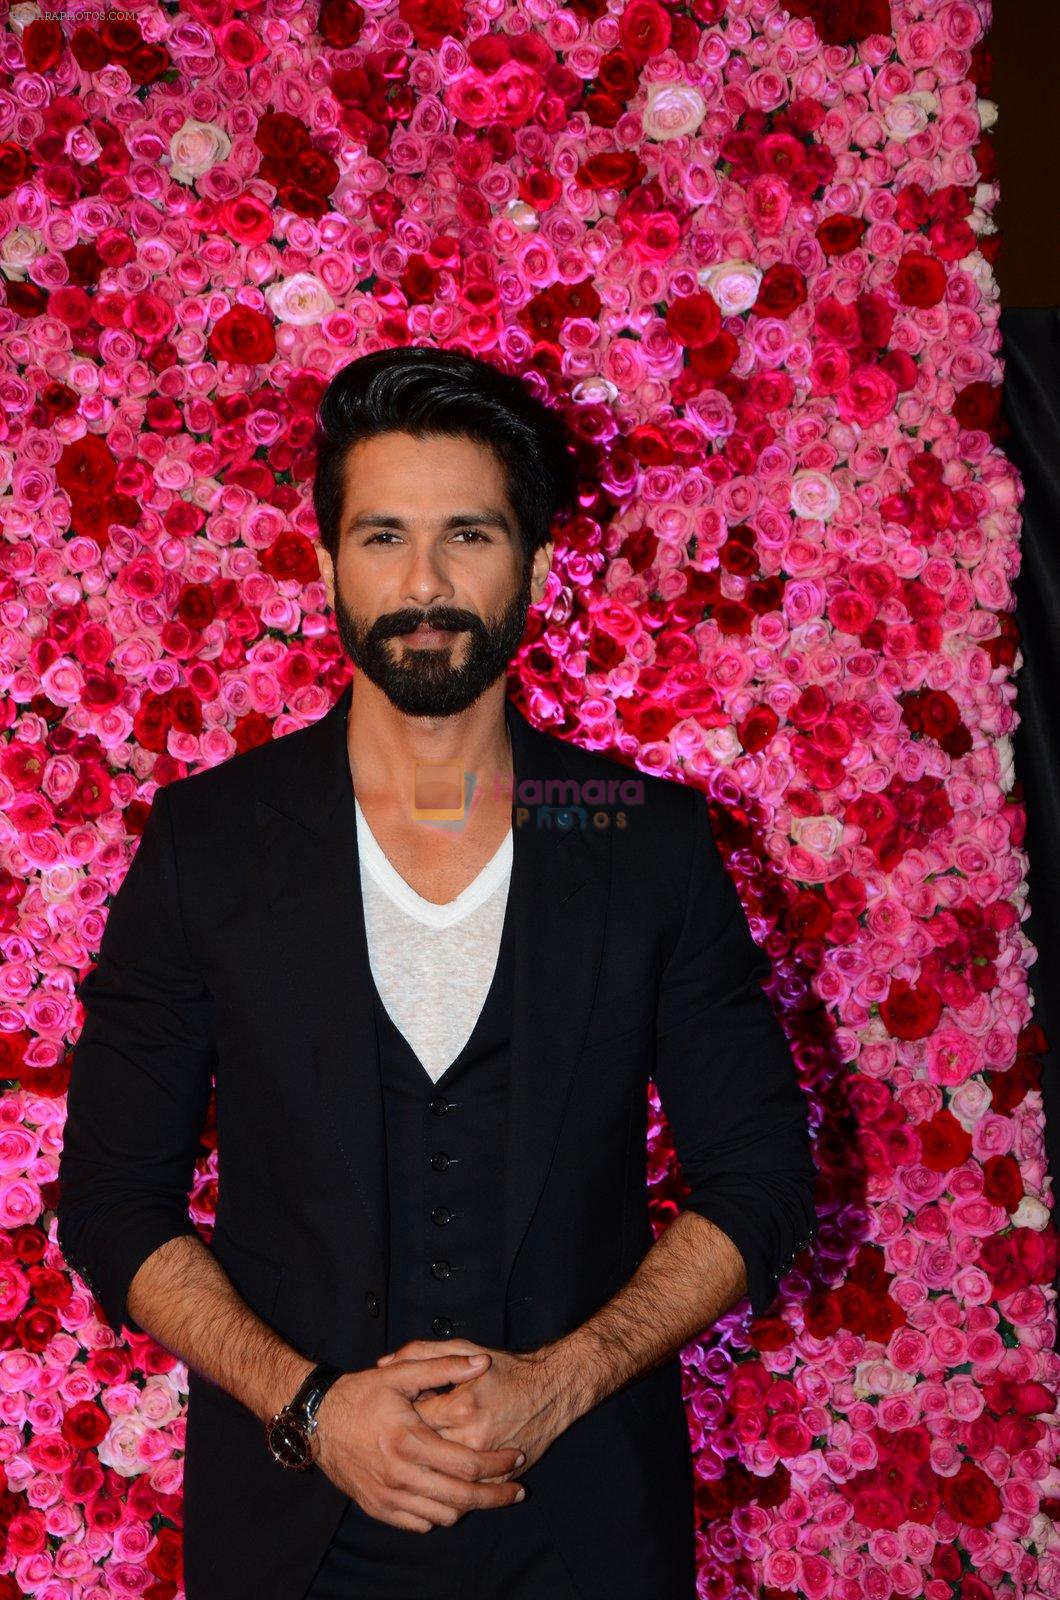 Shahid Kapoor at Lux Golden Rose Awards 2016 on 12th Nov 2016